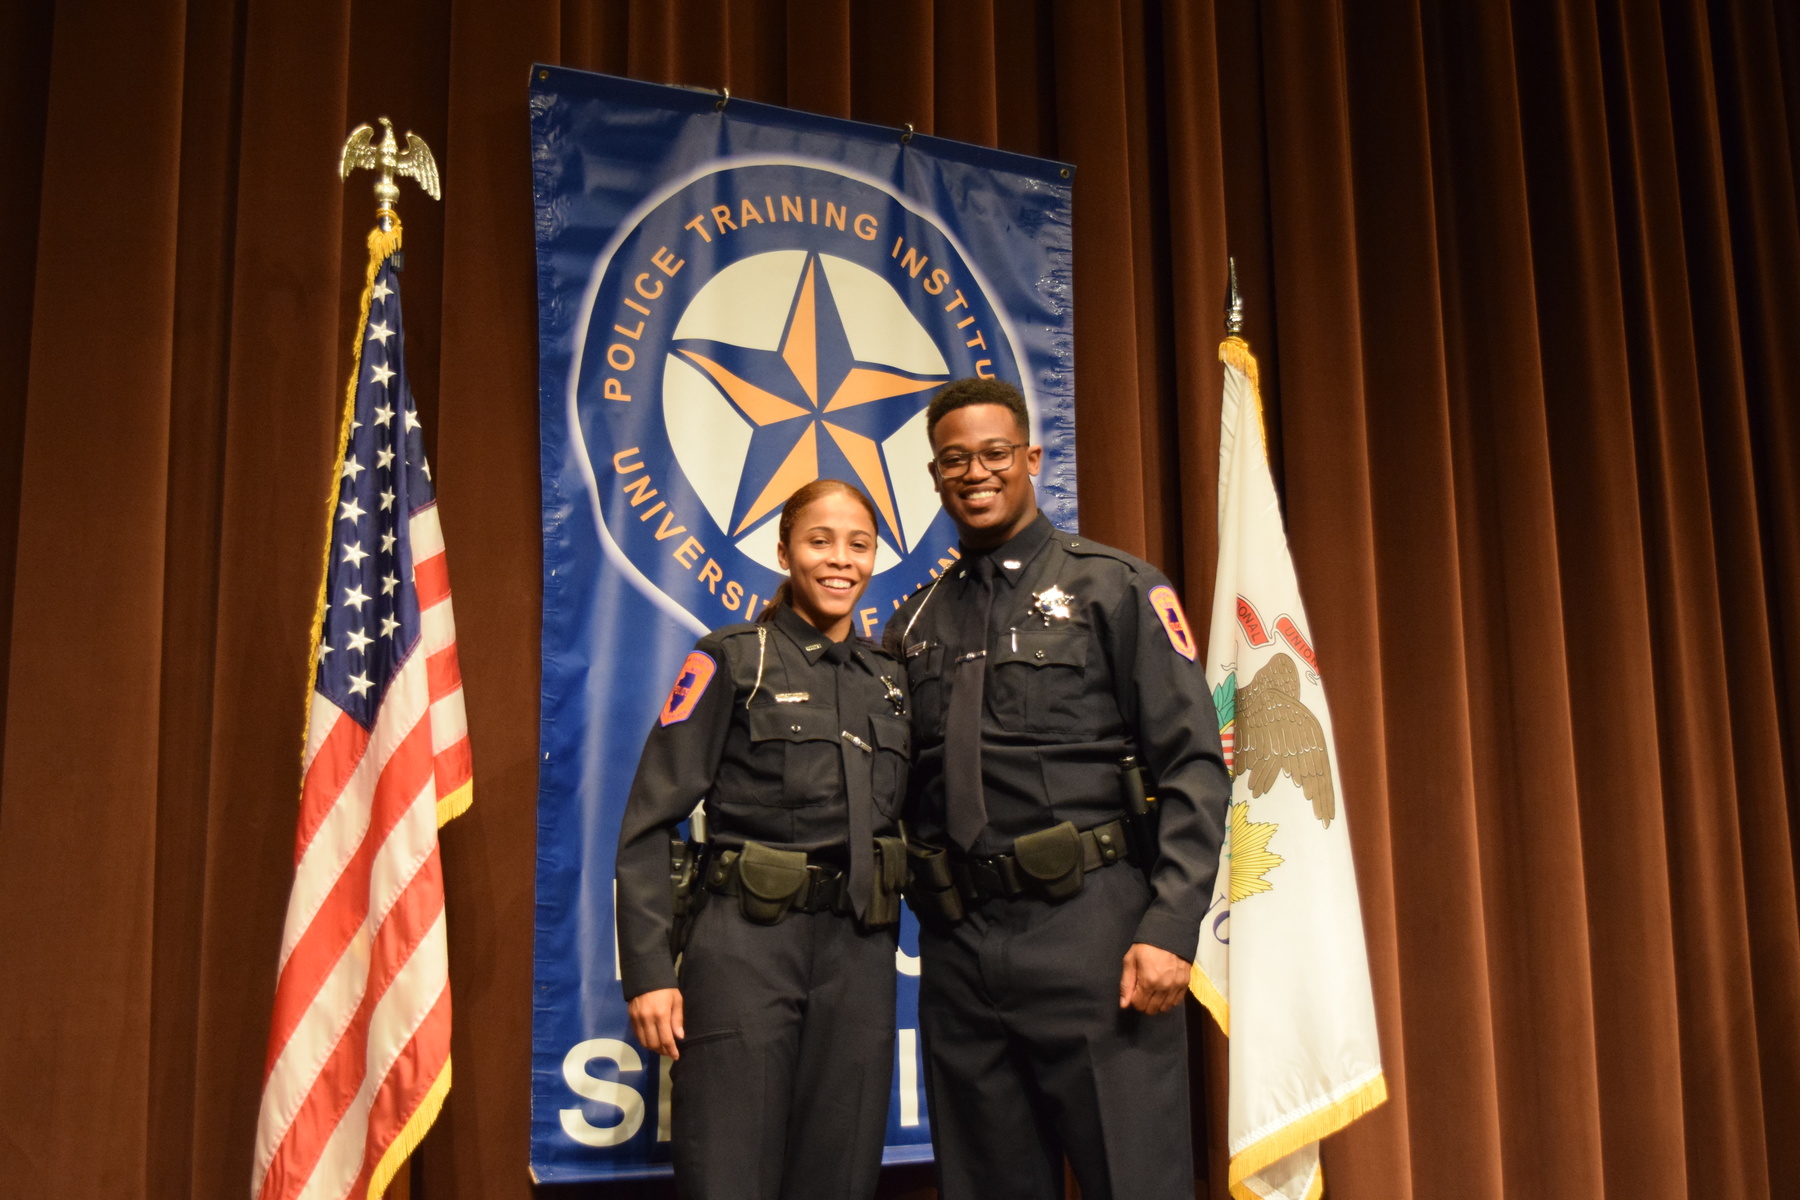 Officer Nina Thigpen and Officer Malik Harrison graduating from the University of Illinois Police Training Institute